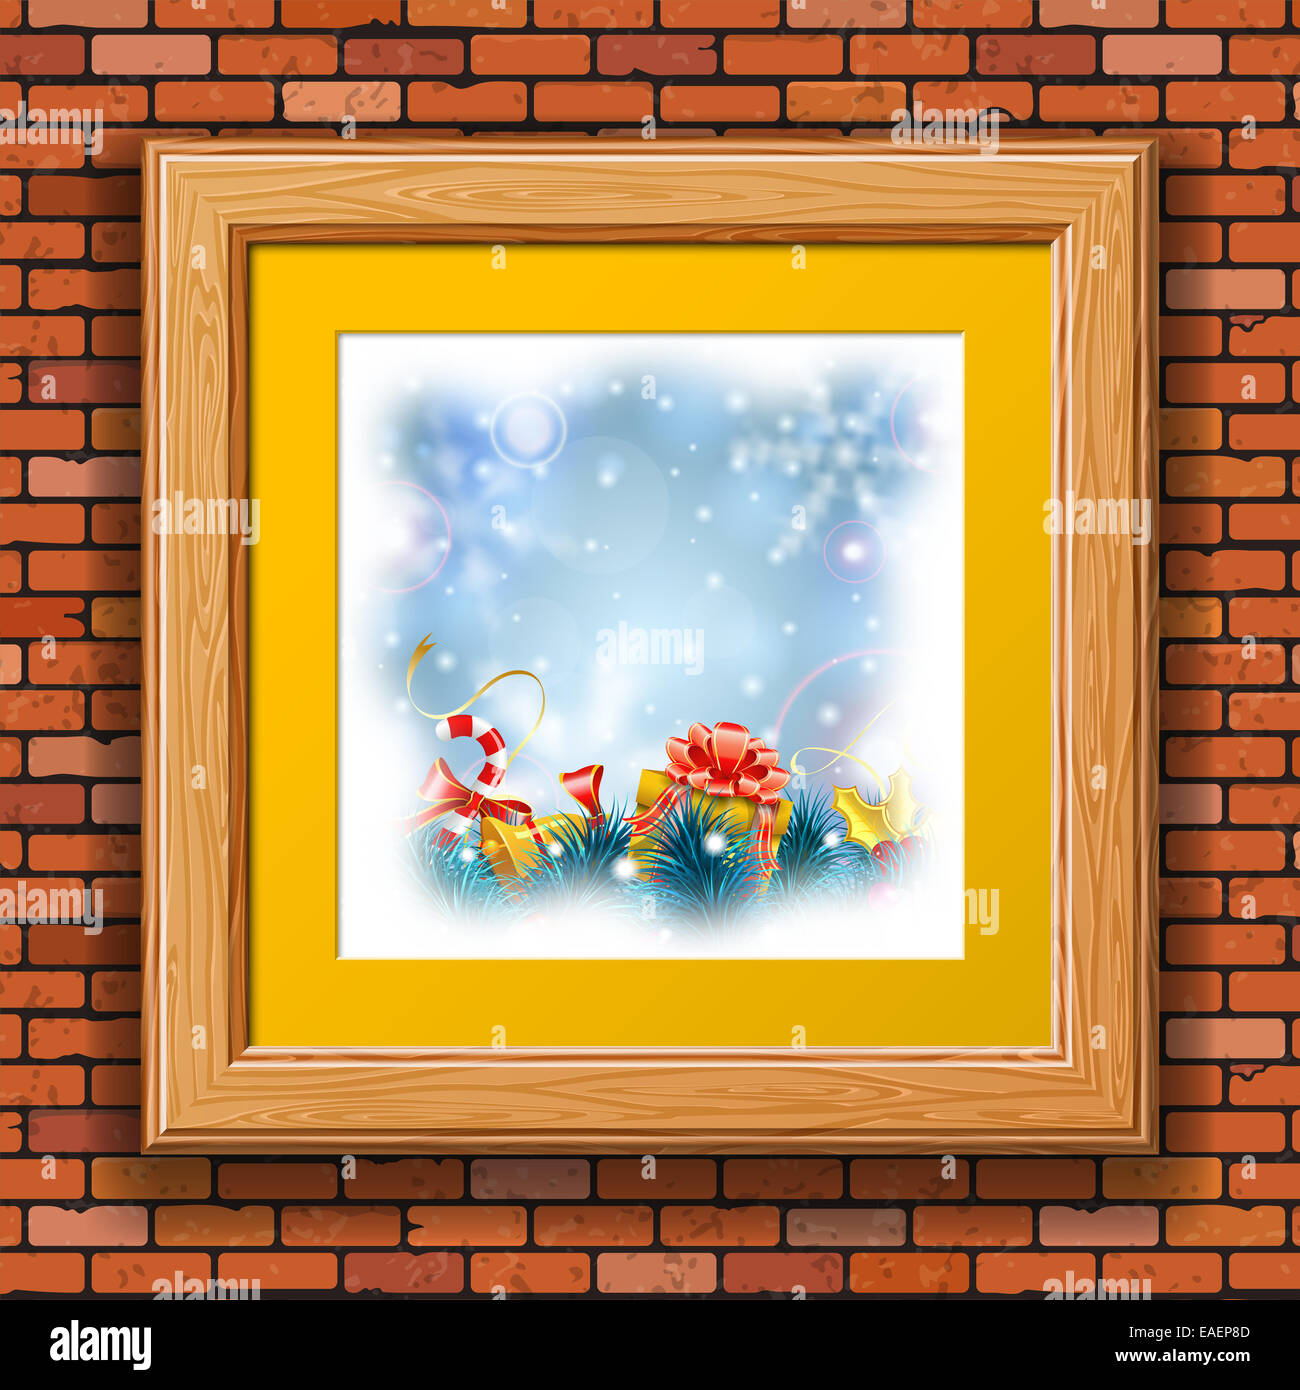 Christmas Blurred Bokeh Background with Snowflakes, Gift, Fir Branches, Gold Streamer and Candy in Wooden Frame on Brick Wall. Stock Photo